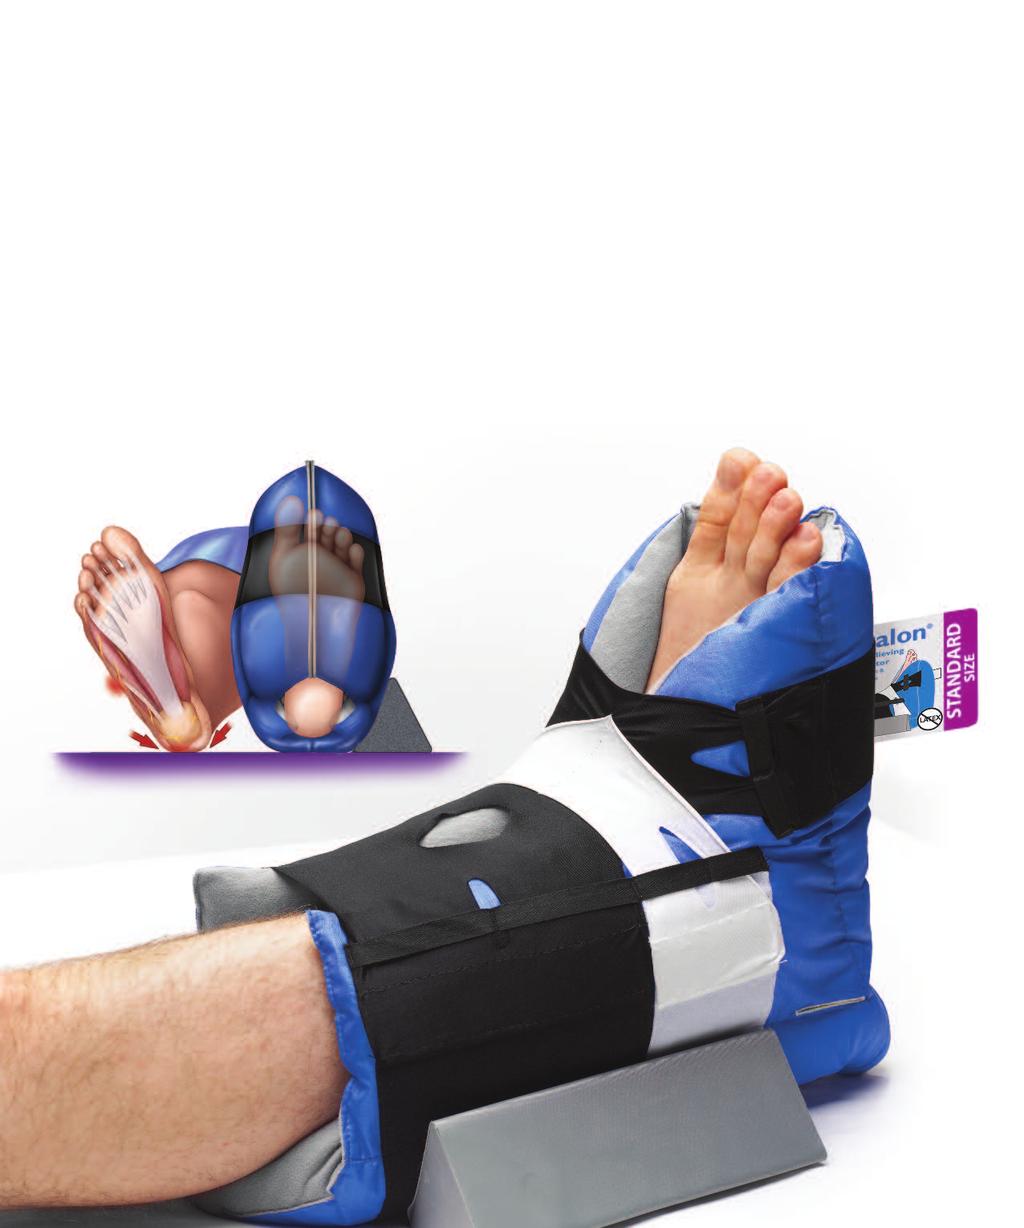 ANOTHER PART OF YOUR COMPLETE PRESSURE ULCER PREVENTION PROGRAM PREVALON PRESSURE-RELIEVING HEEL PROTECTOR Minimize pressure, friction and shear on the feet, heels and ankles of non-ambulatory